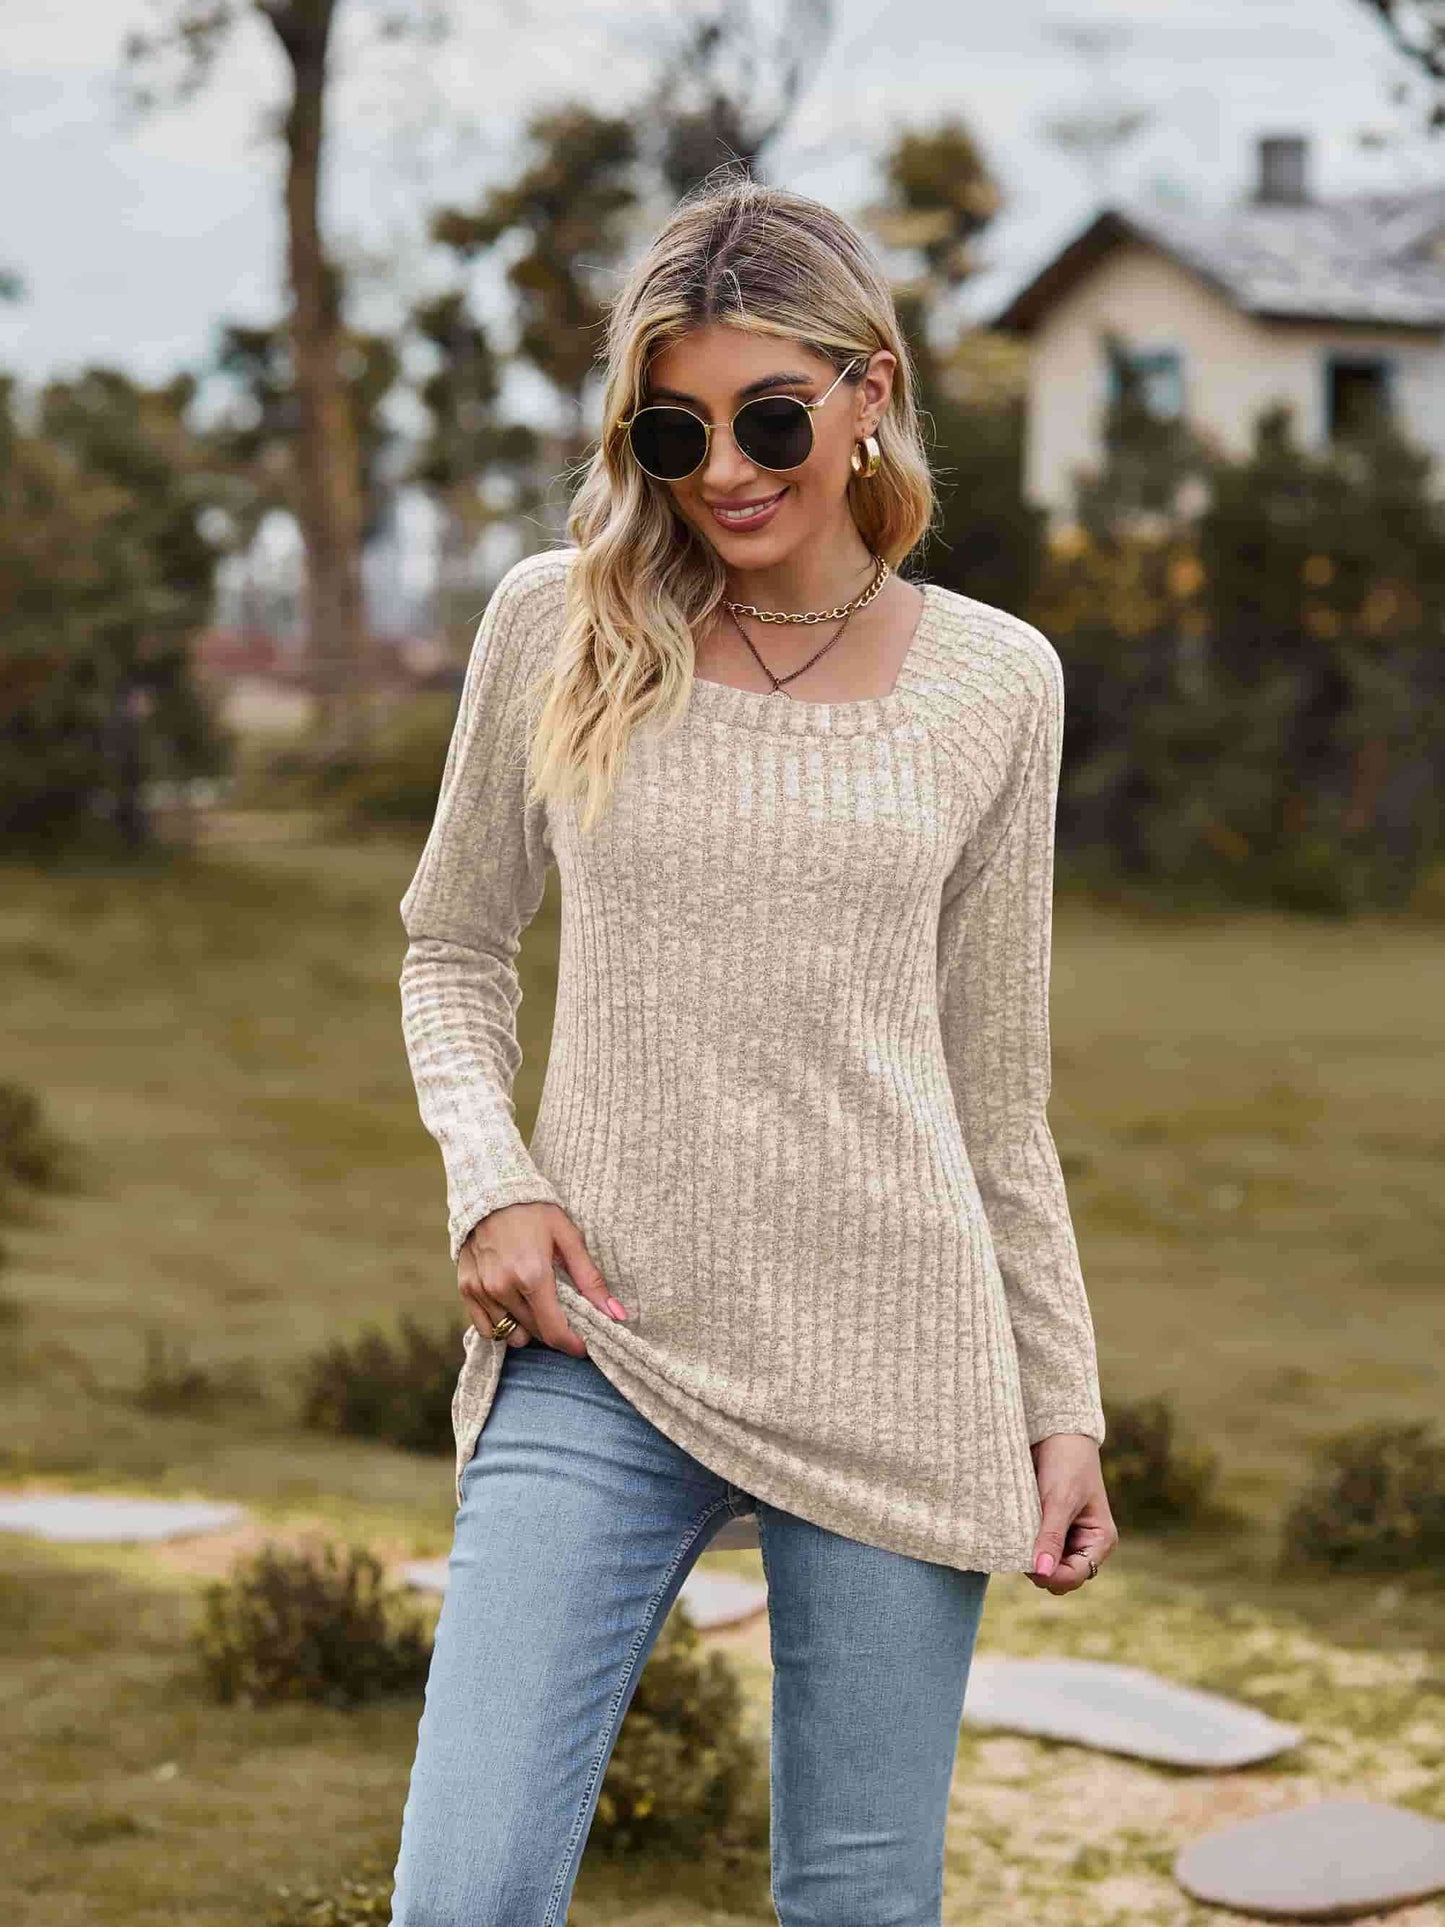 Get trendy with Ribbed Square Neck Long Sleeve Tee - T-Shirt available at Styles Code. Grab yours today!